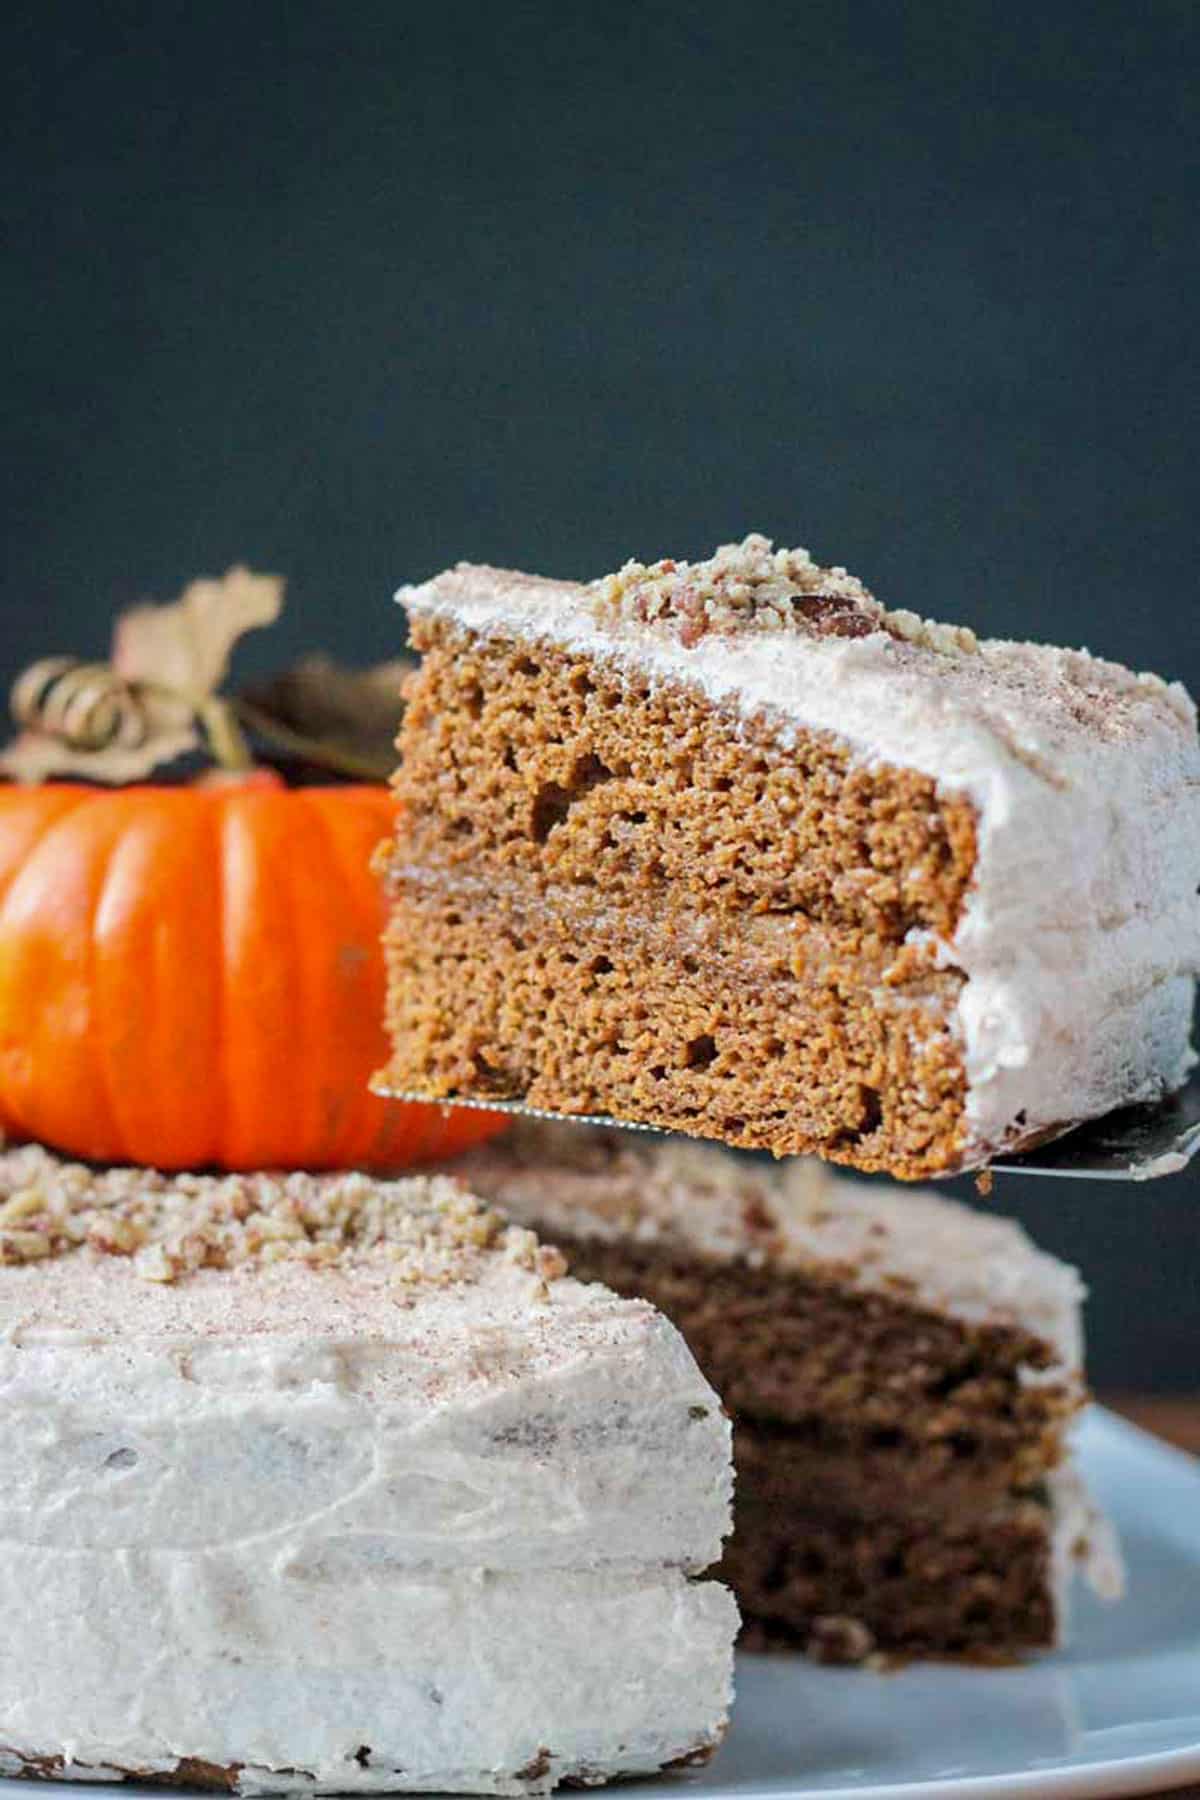 Slice of pumpkin layer cake being lifted from a whole cake.